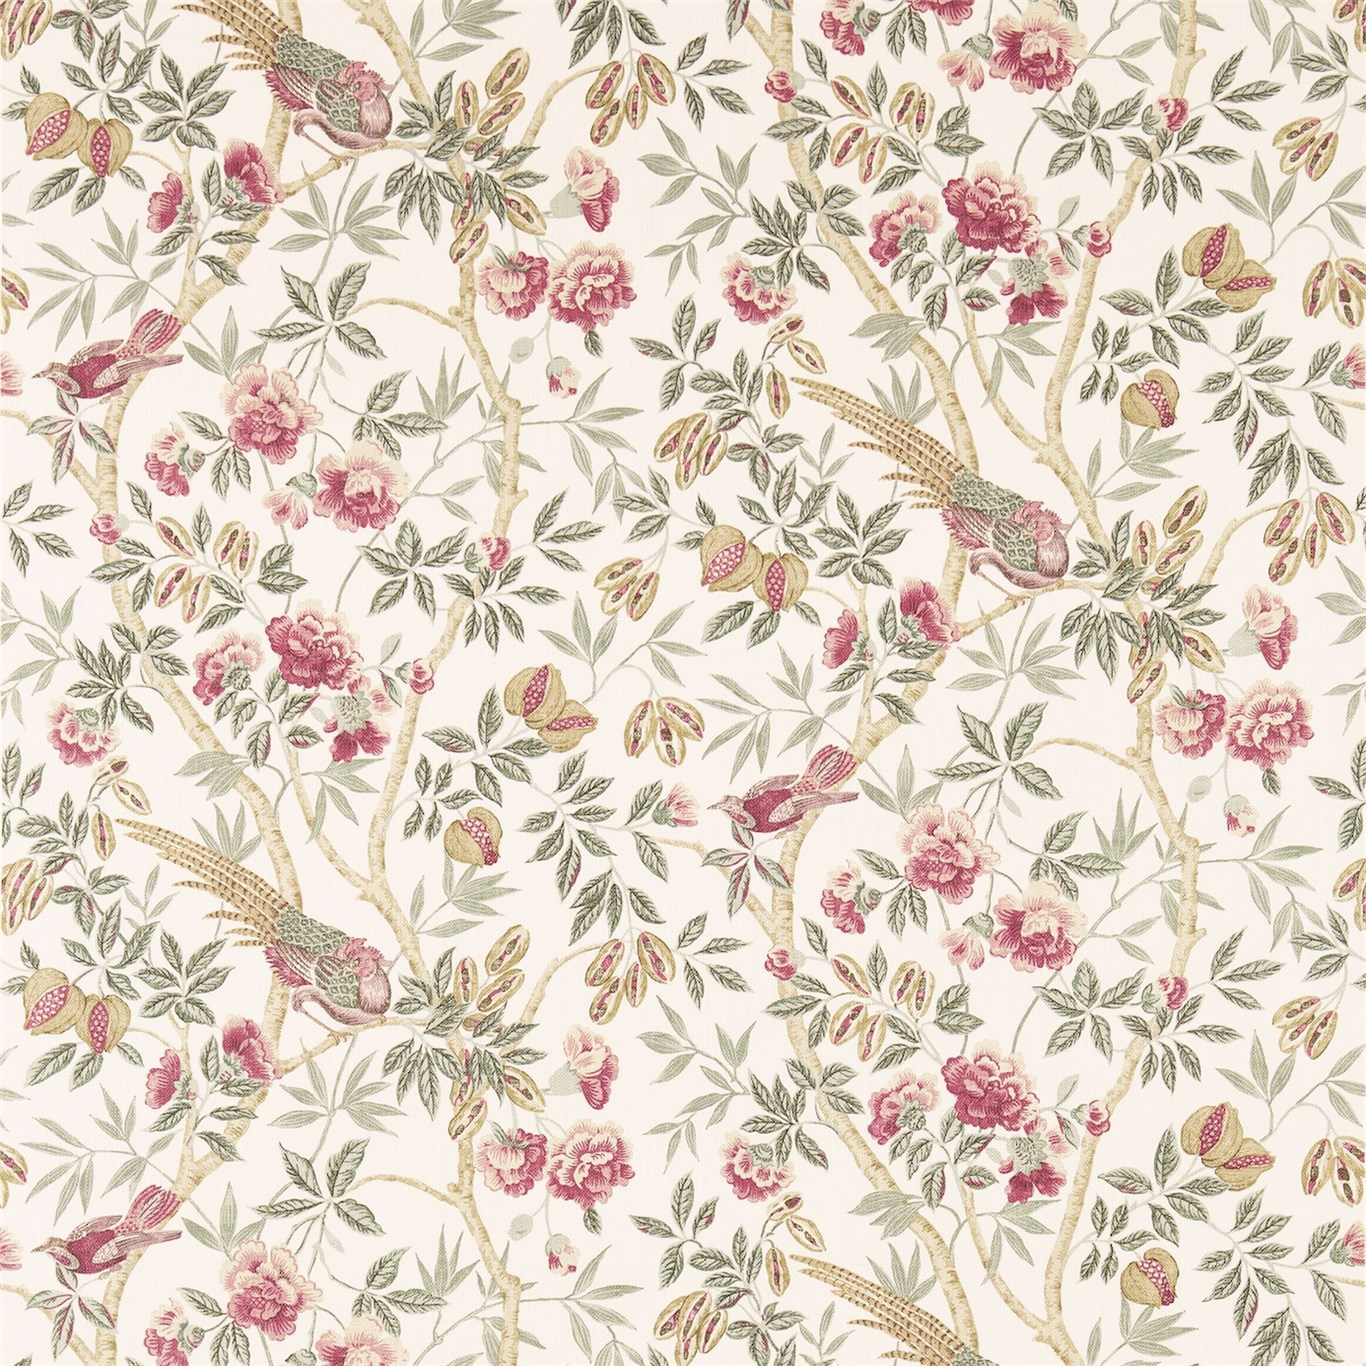 Abbeville Rose/Calico Fabric by SAN